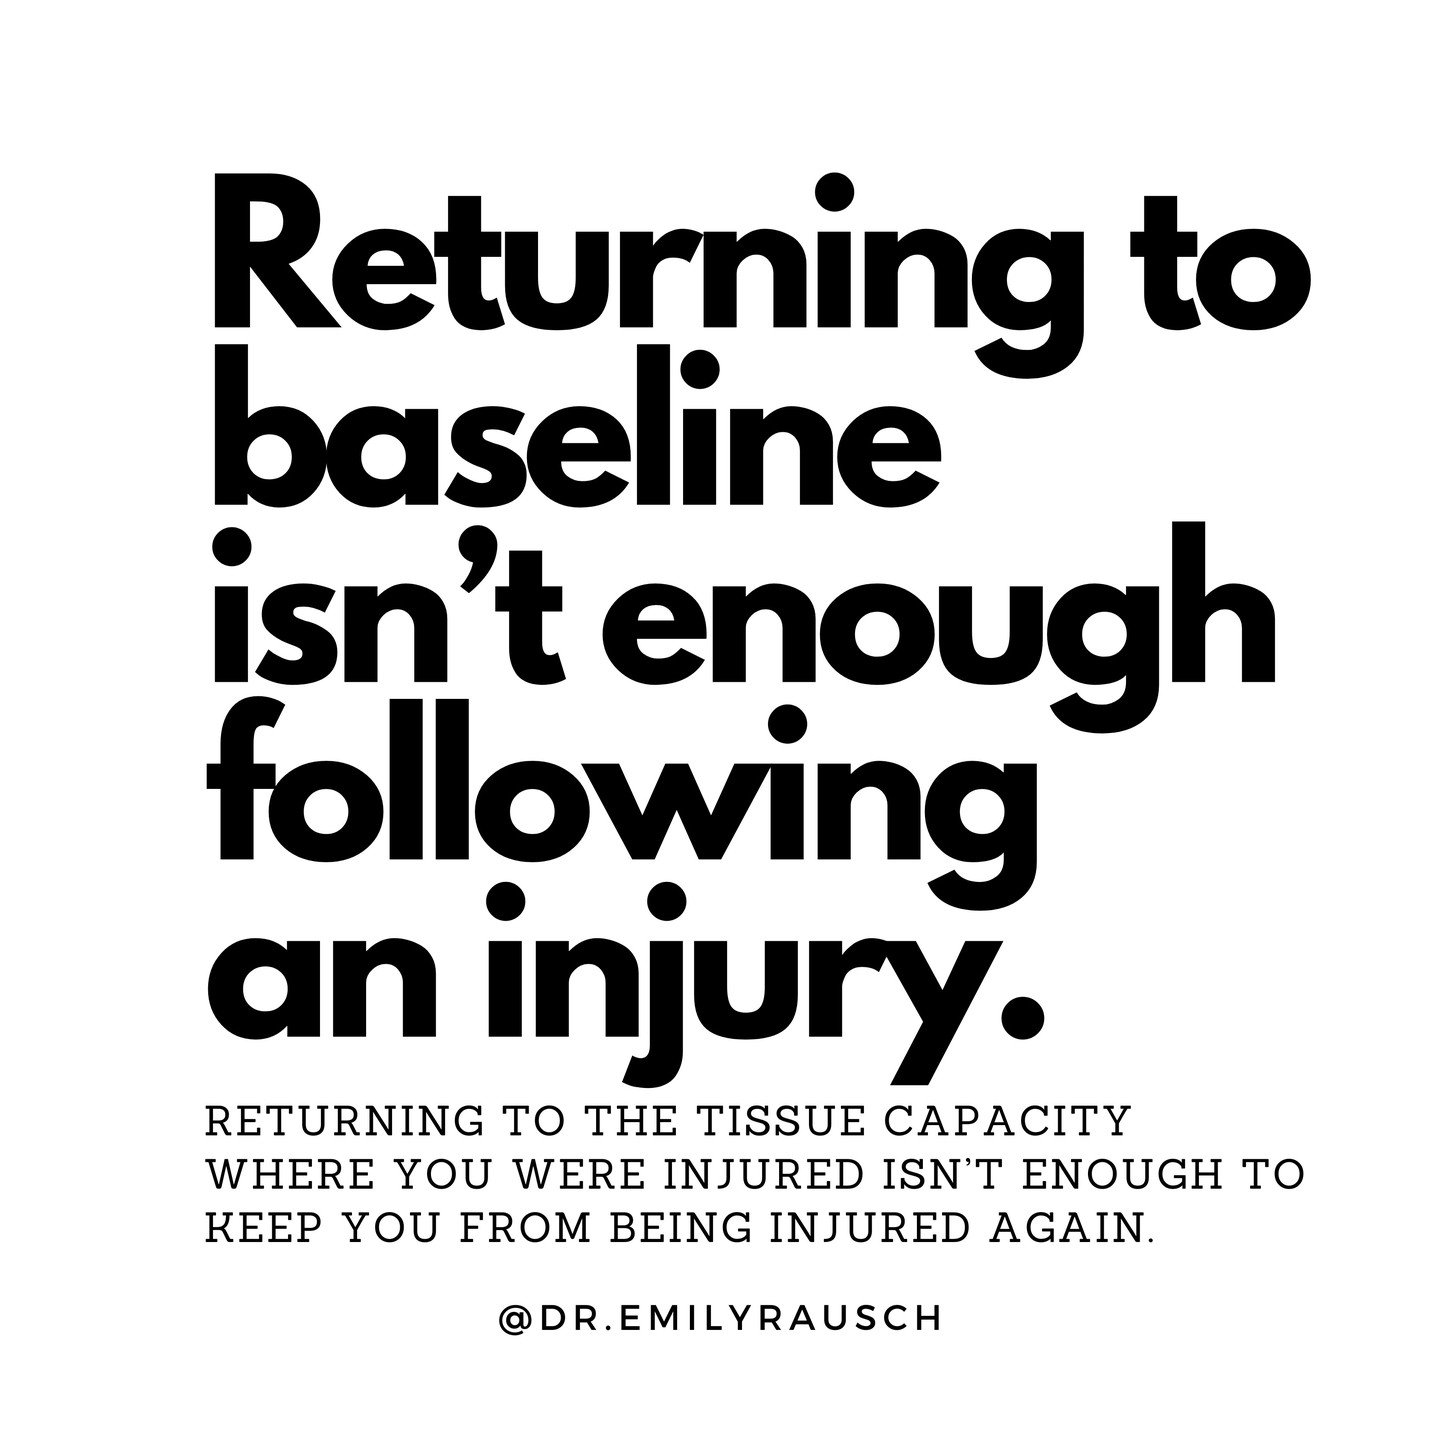 A common goal of injury rehab is to return to baseline. This isn&rsquo;t enough. 

The baseline you were at previously was where you were injured. 

Why would you assume that would be enough to keep you from injured again?

You&rsquo;re at the same c